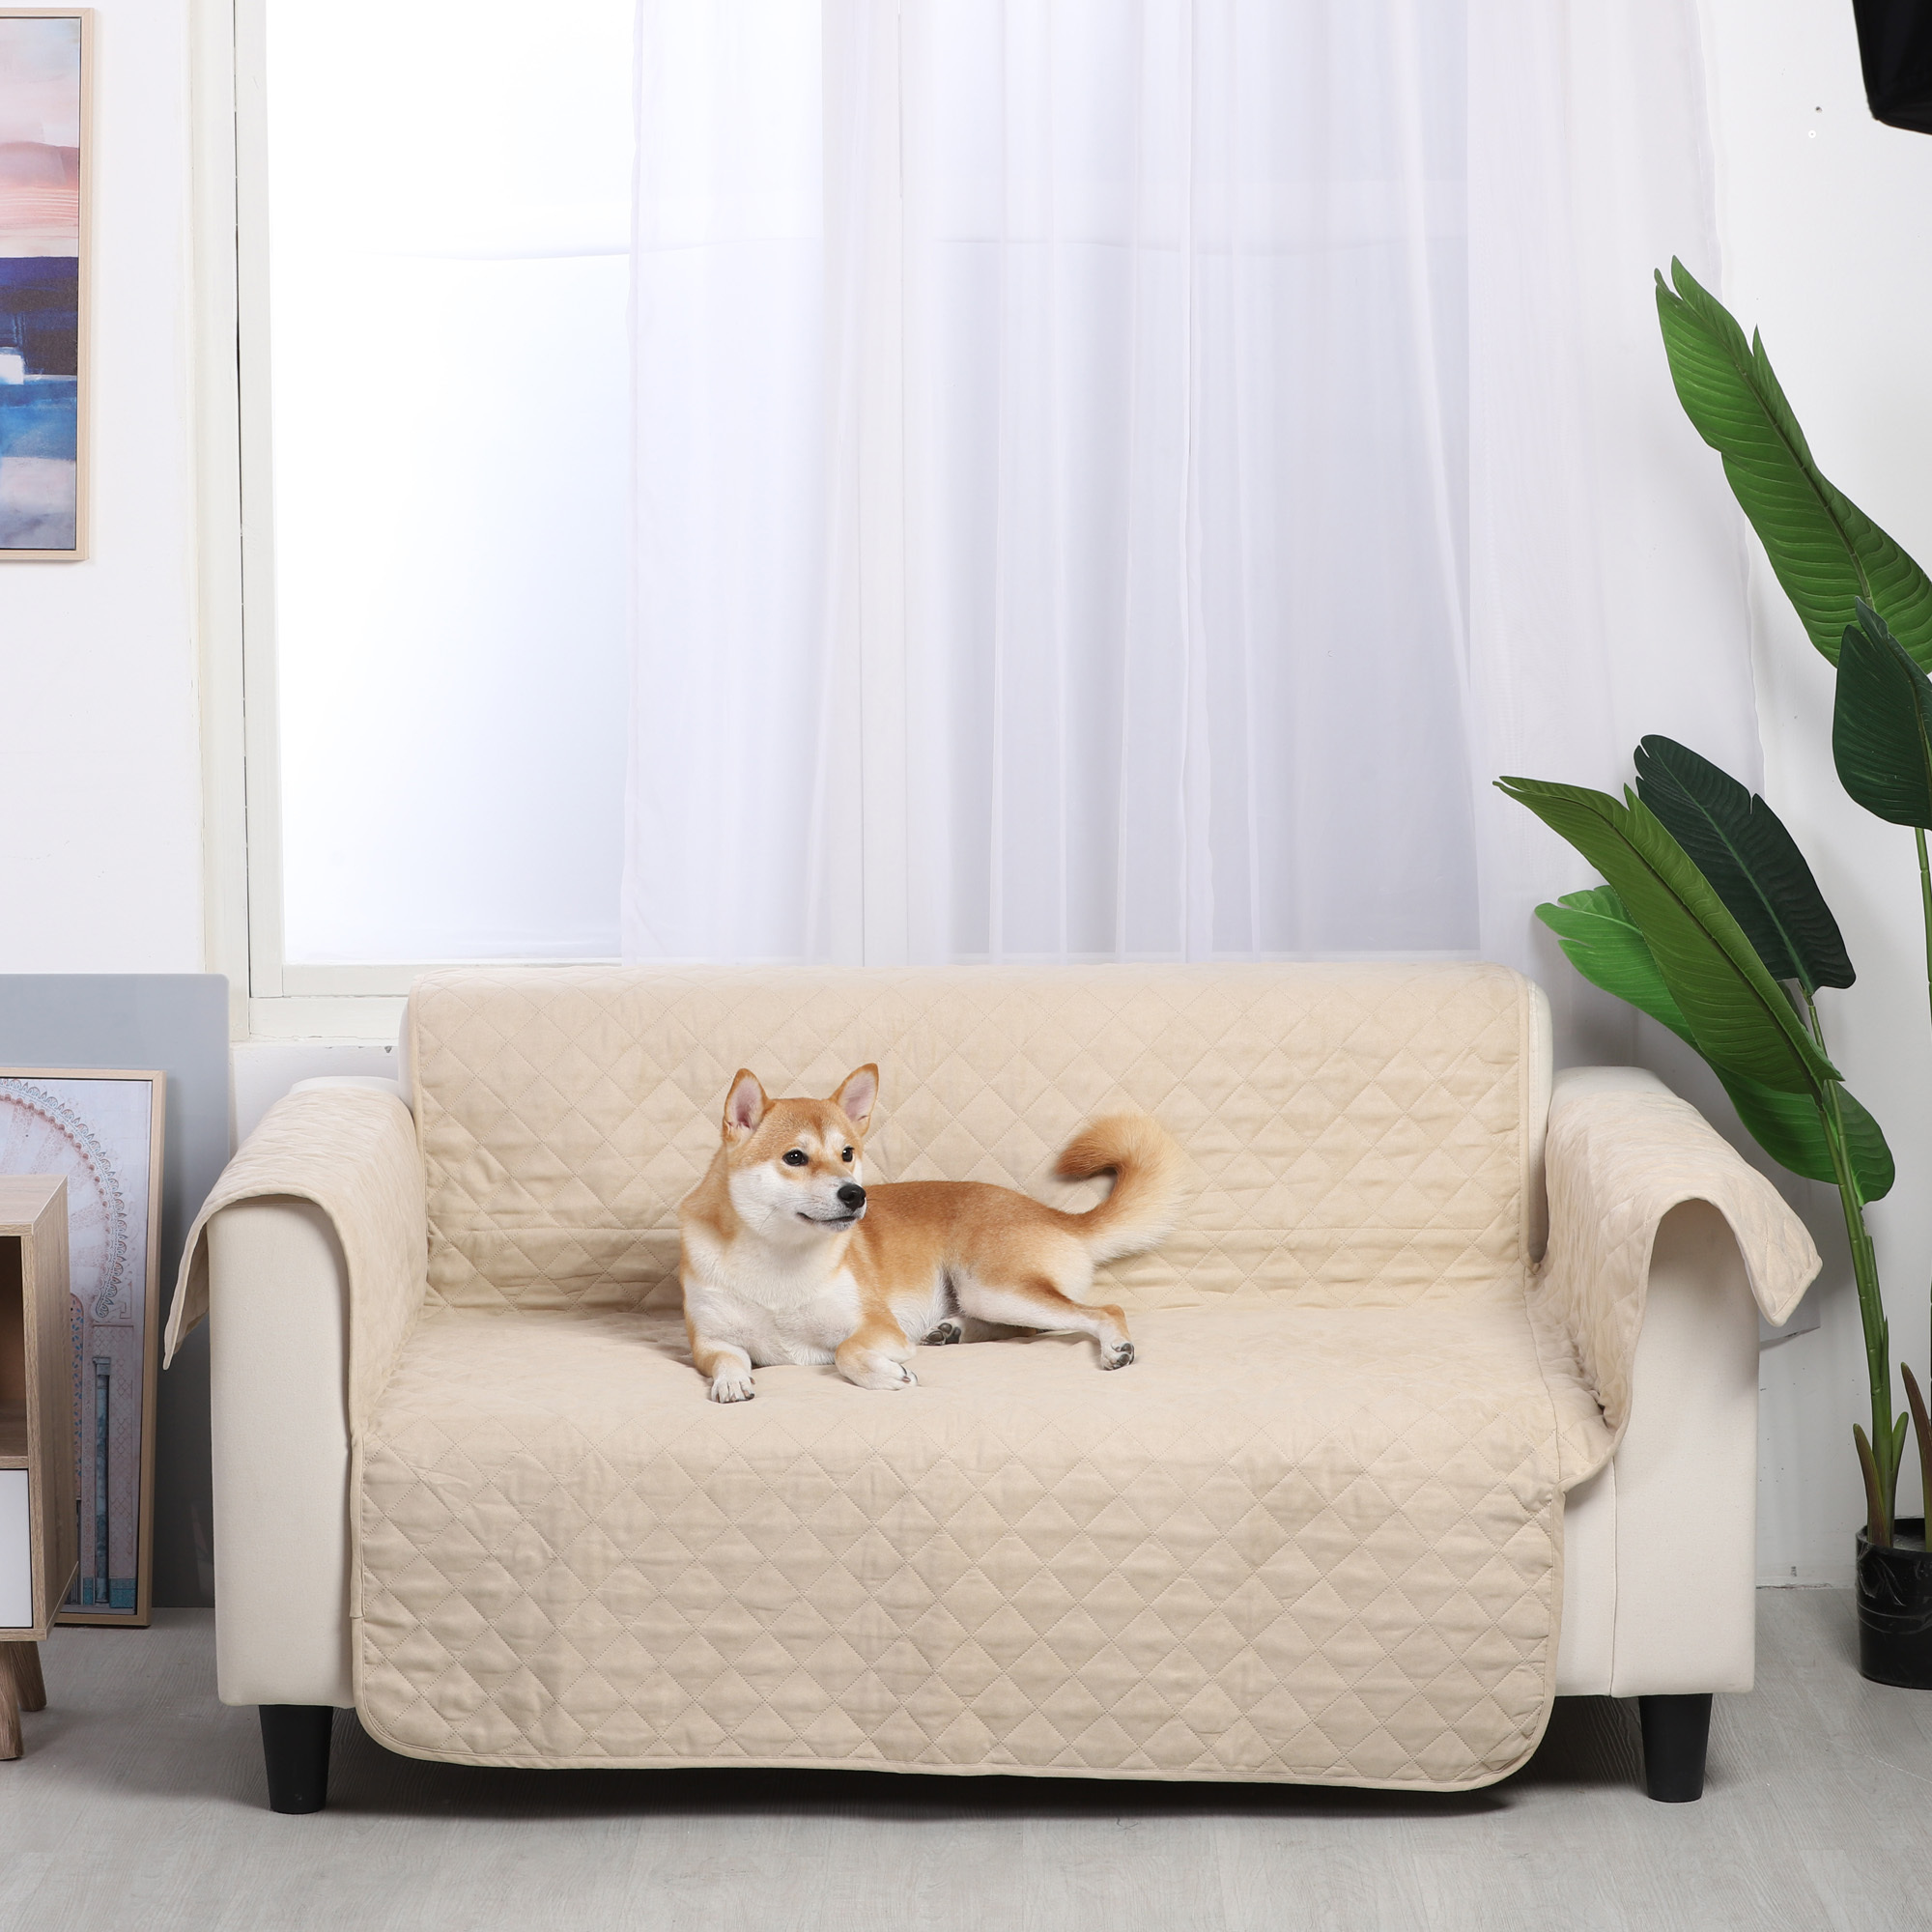 Kids For Pets Furniture Protector Washable Anti-Slip with Elastic Straps PETEMOO Waterproof Reversible Sofa Slipcover 